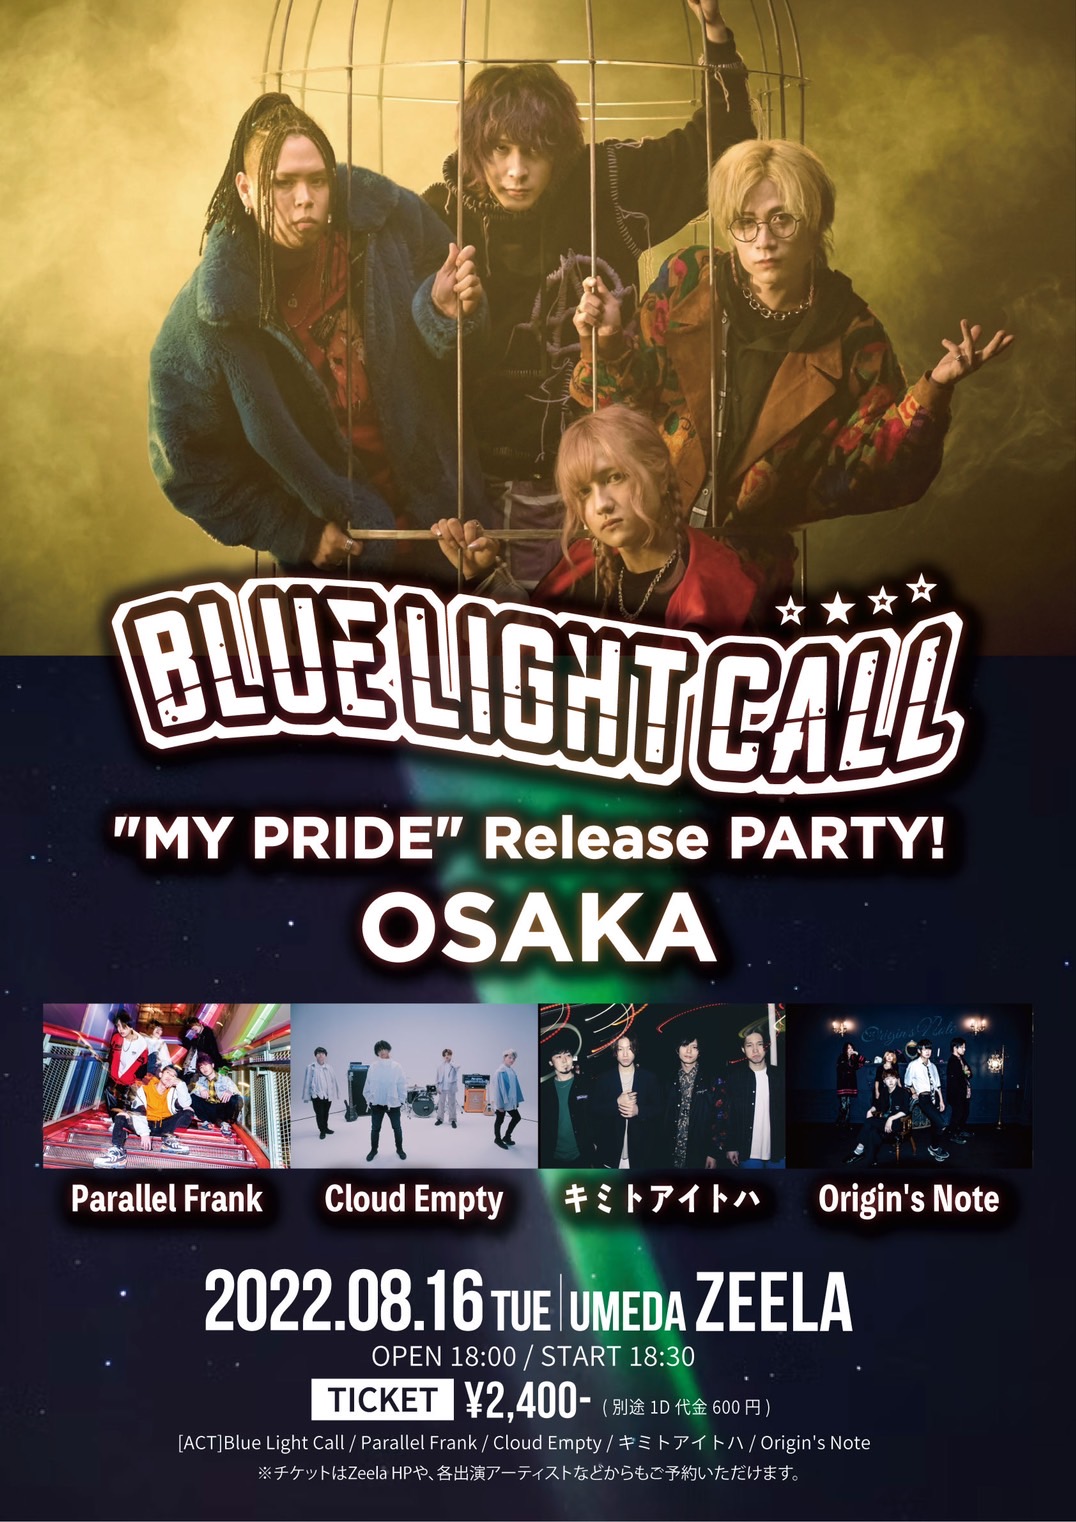 Blue Light Call pre. "MY PRIDE" Release PARTY! OSAKA